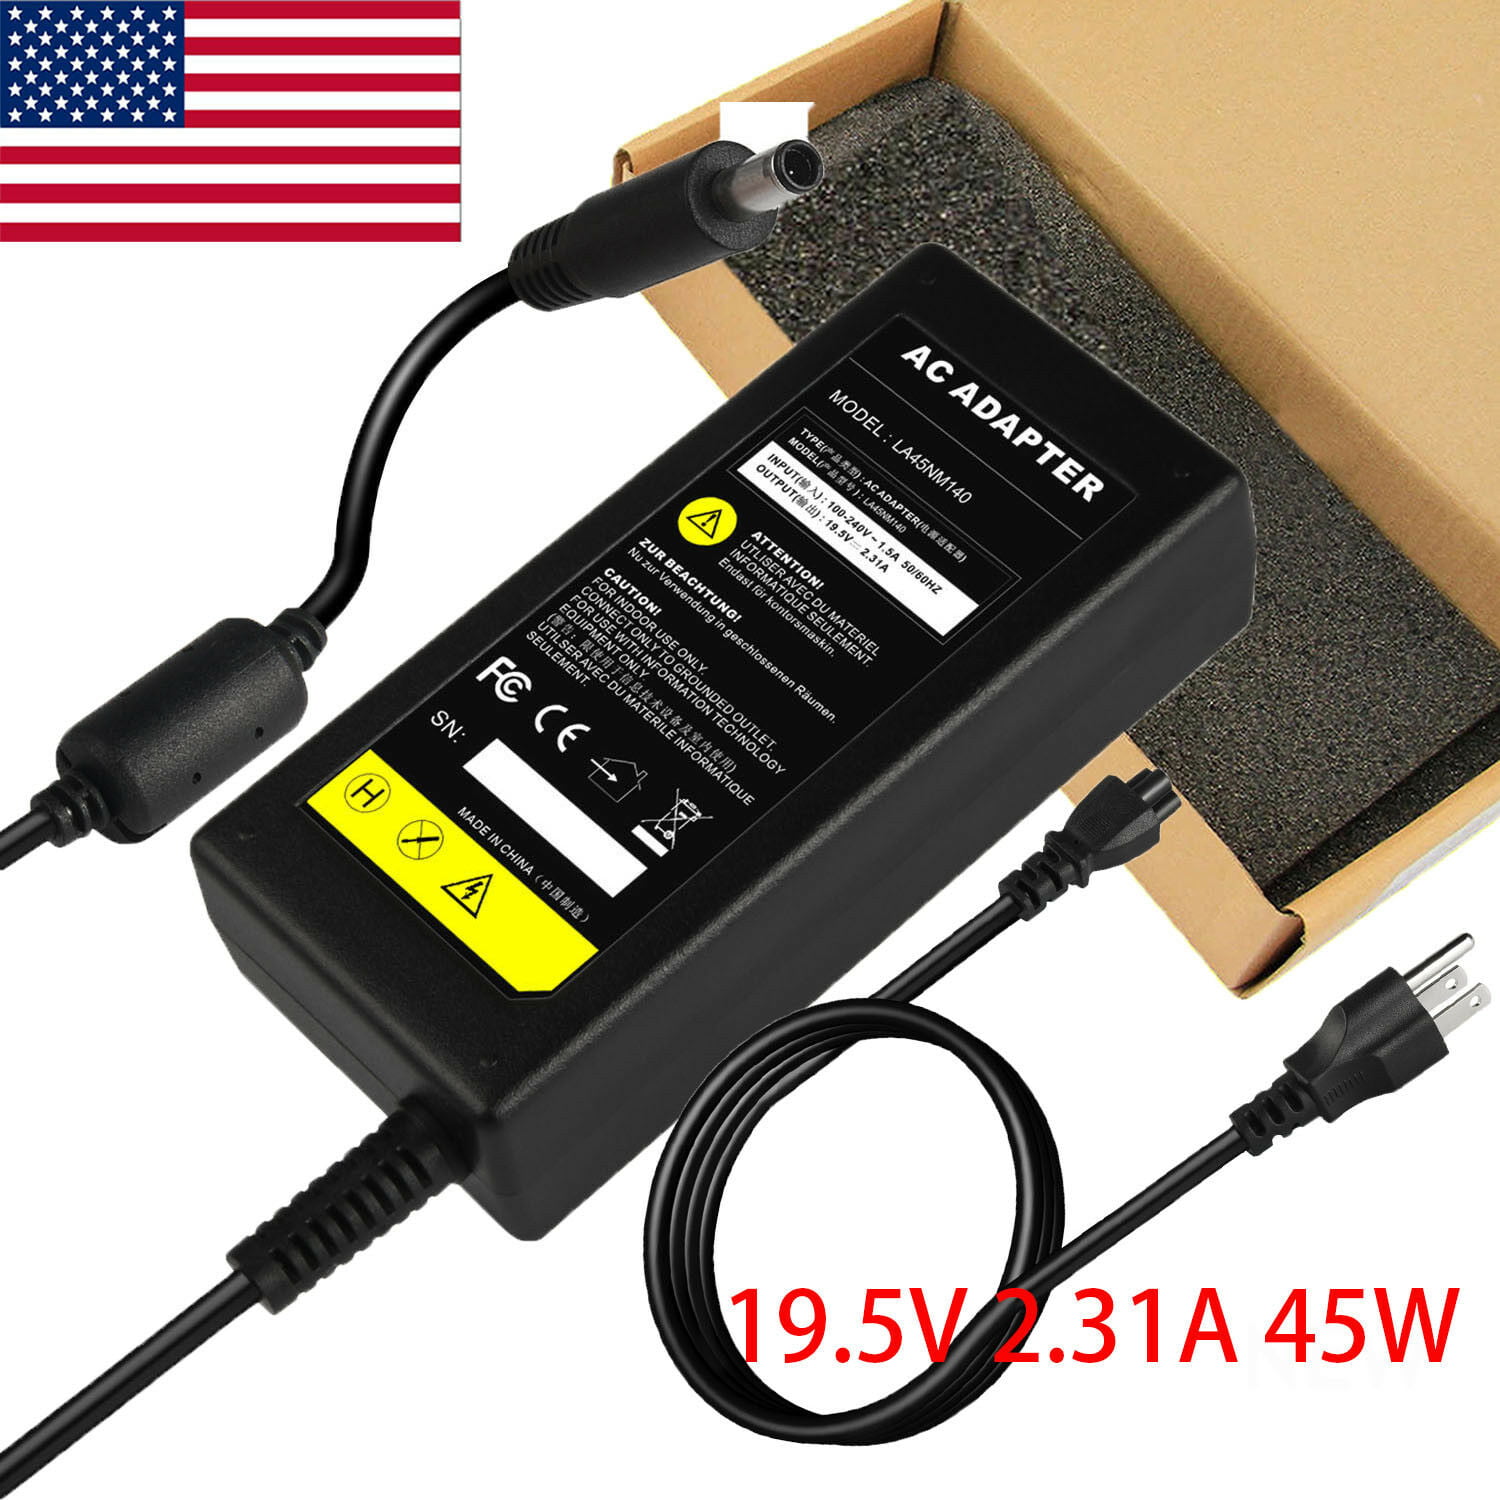 OEM AC Adapter For Dell Inspiron 15 3000 5000 7000 Series Power Supply Charger